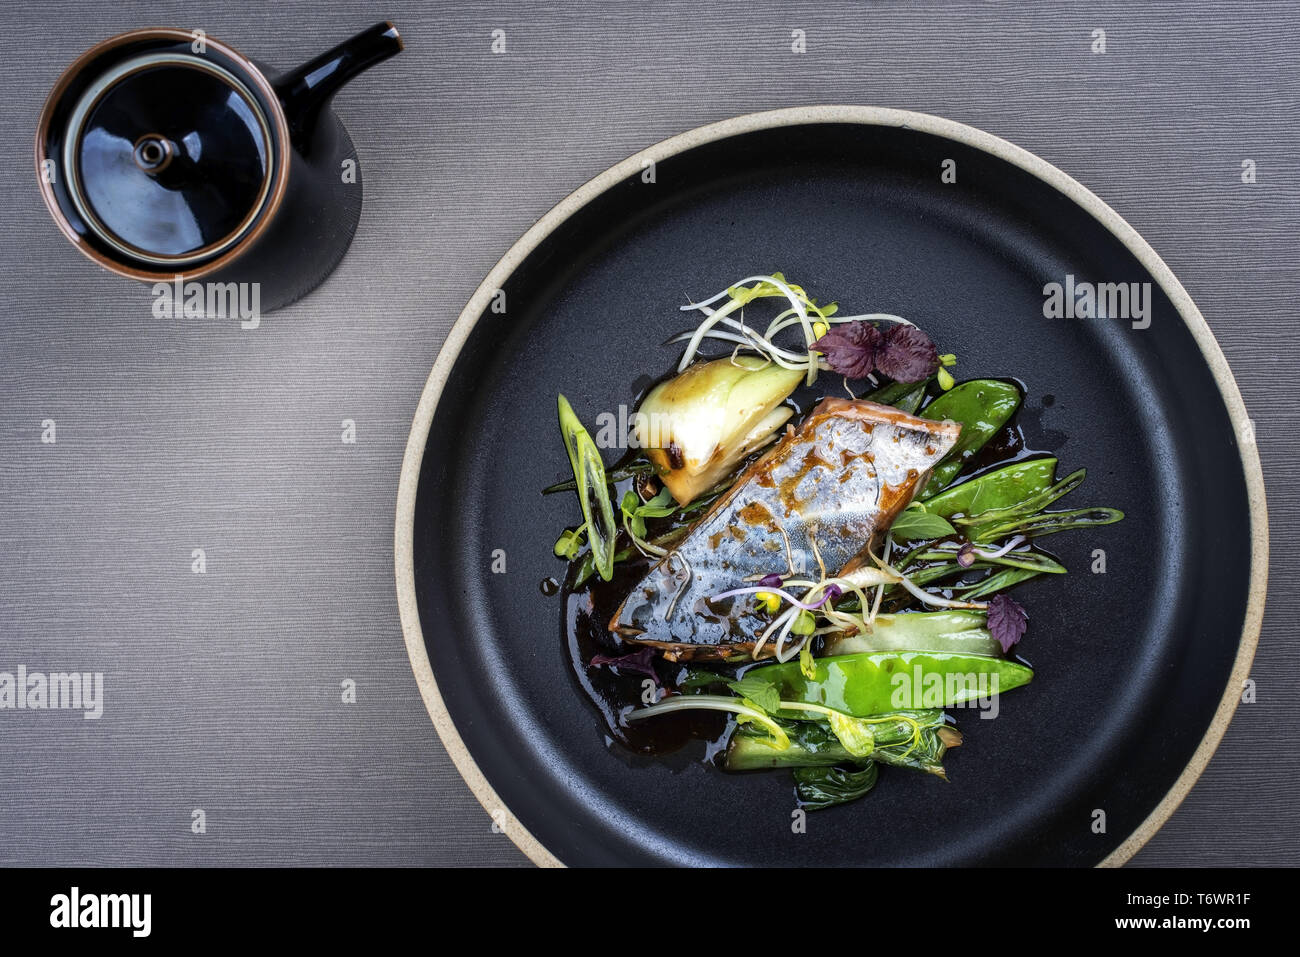 Modern style Japanese bonito tuna fish filet with vegetable glazed in teriyaki sauce as top view on a plate with copy space Stock Photo